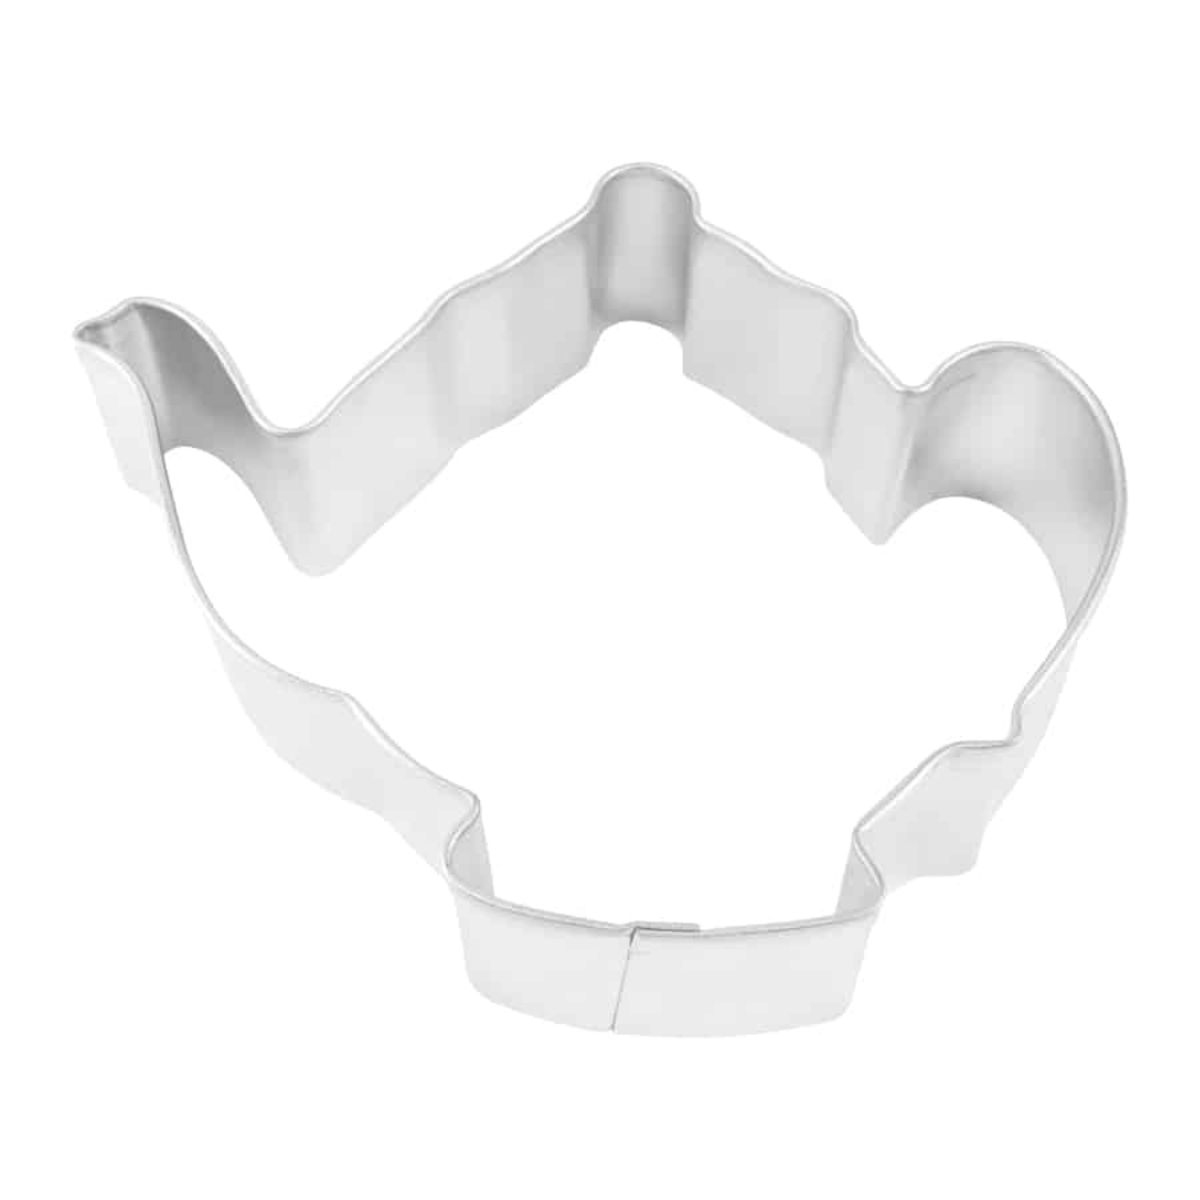 Mushroom Cookie Cutter – TheDepot.LakeviewOhio